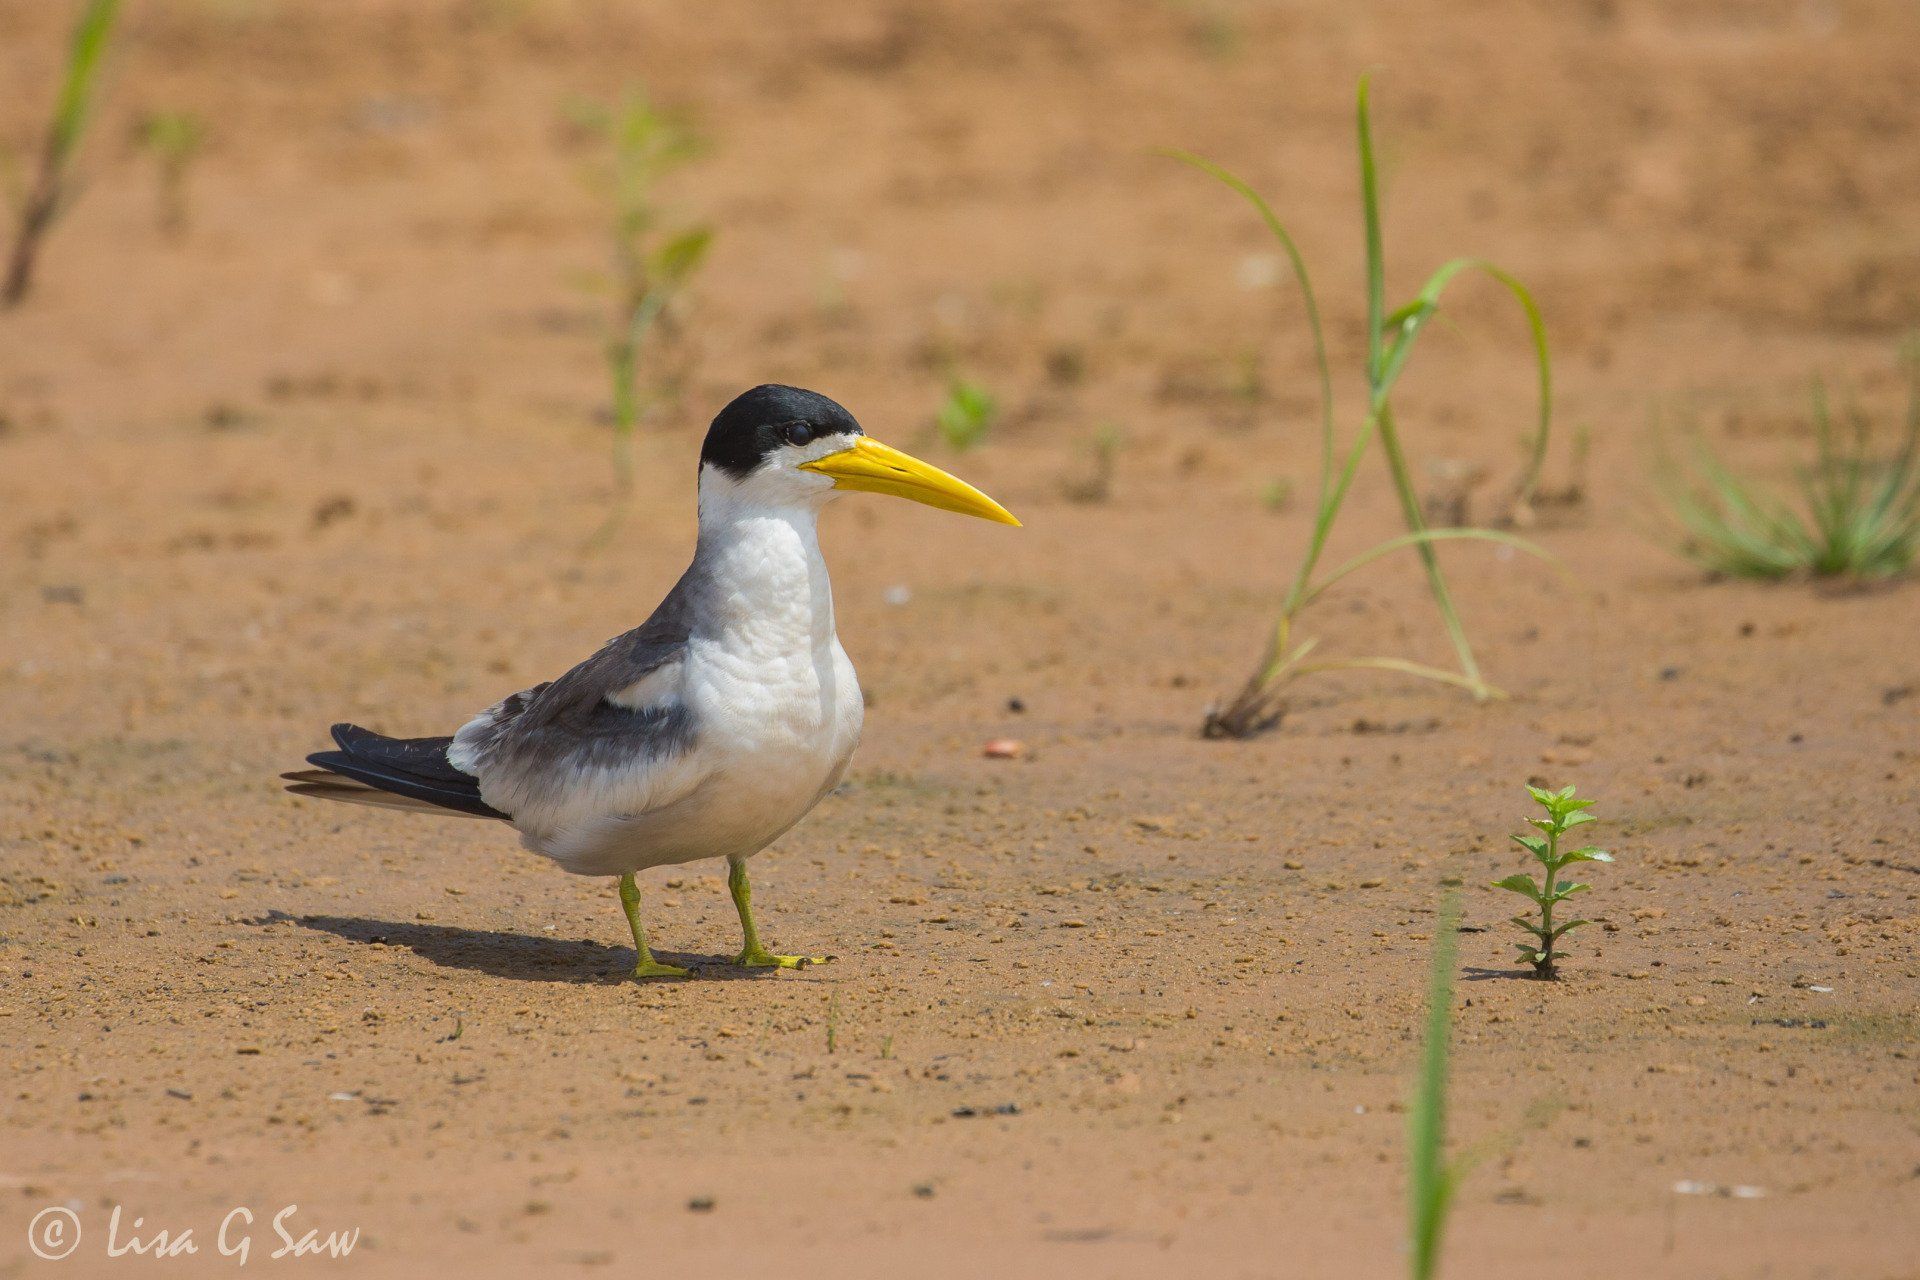 Large-Billed Tern with yellow bill